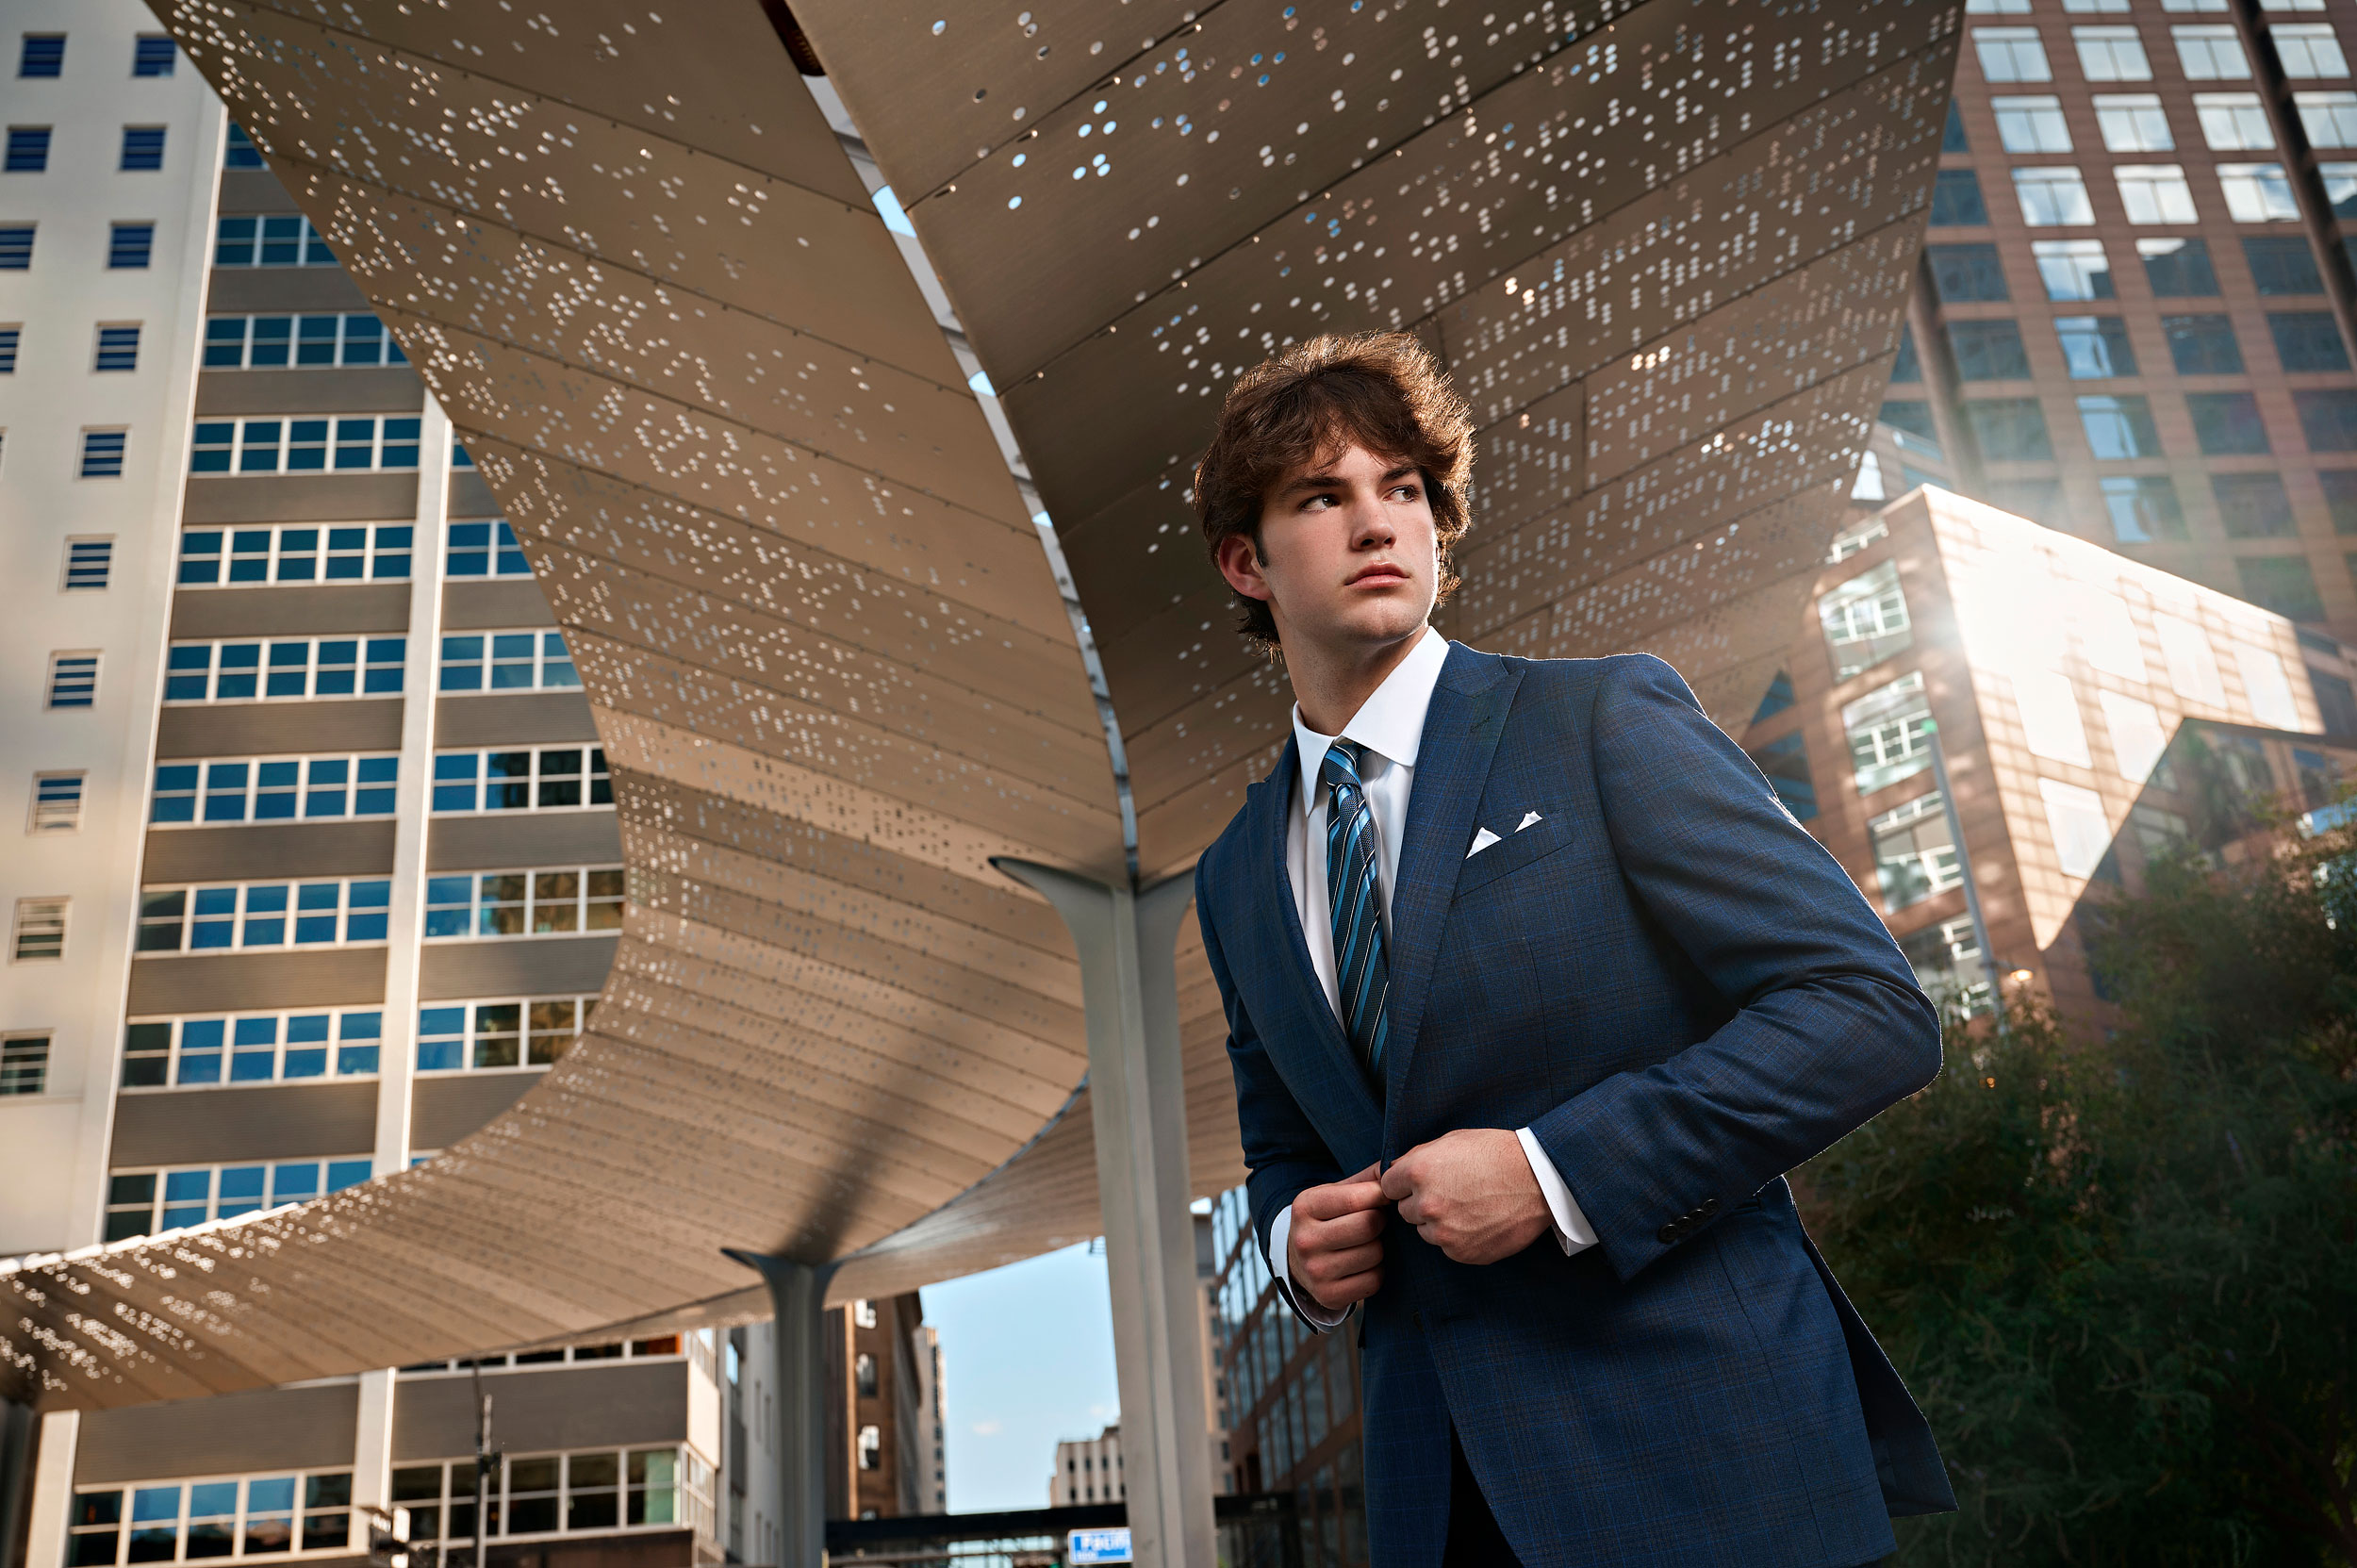 Parish episcopal senior portraits in downtown dallas of a boy in pacific plaza monument by photographer Jeff Dietz